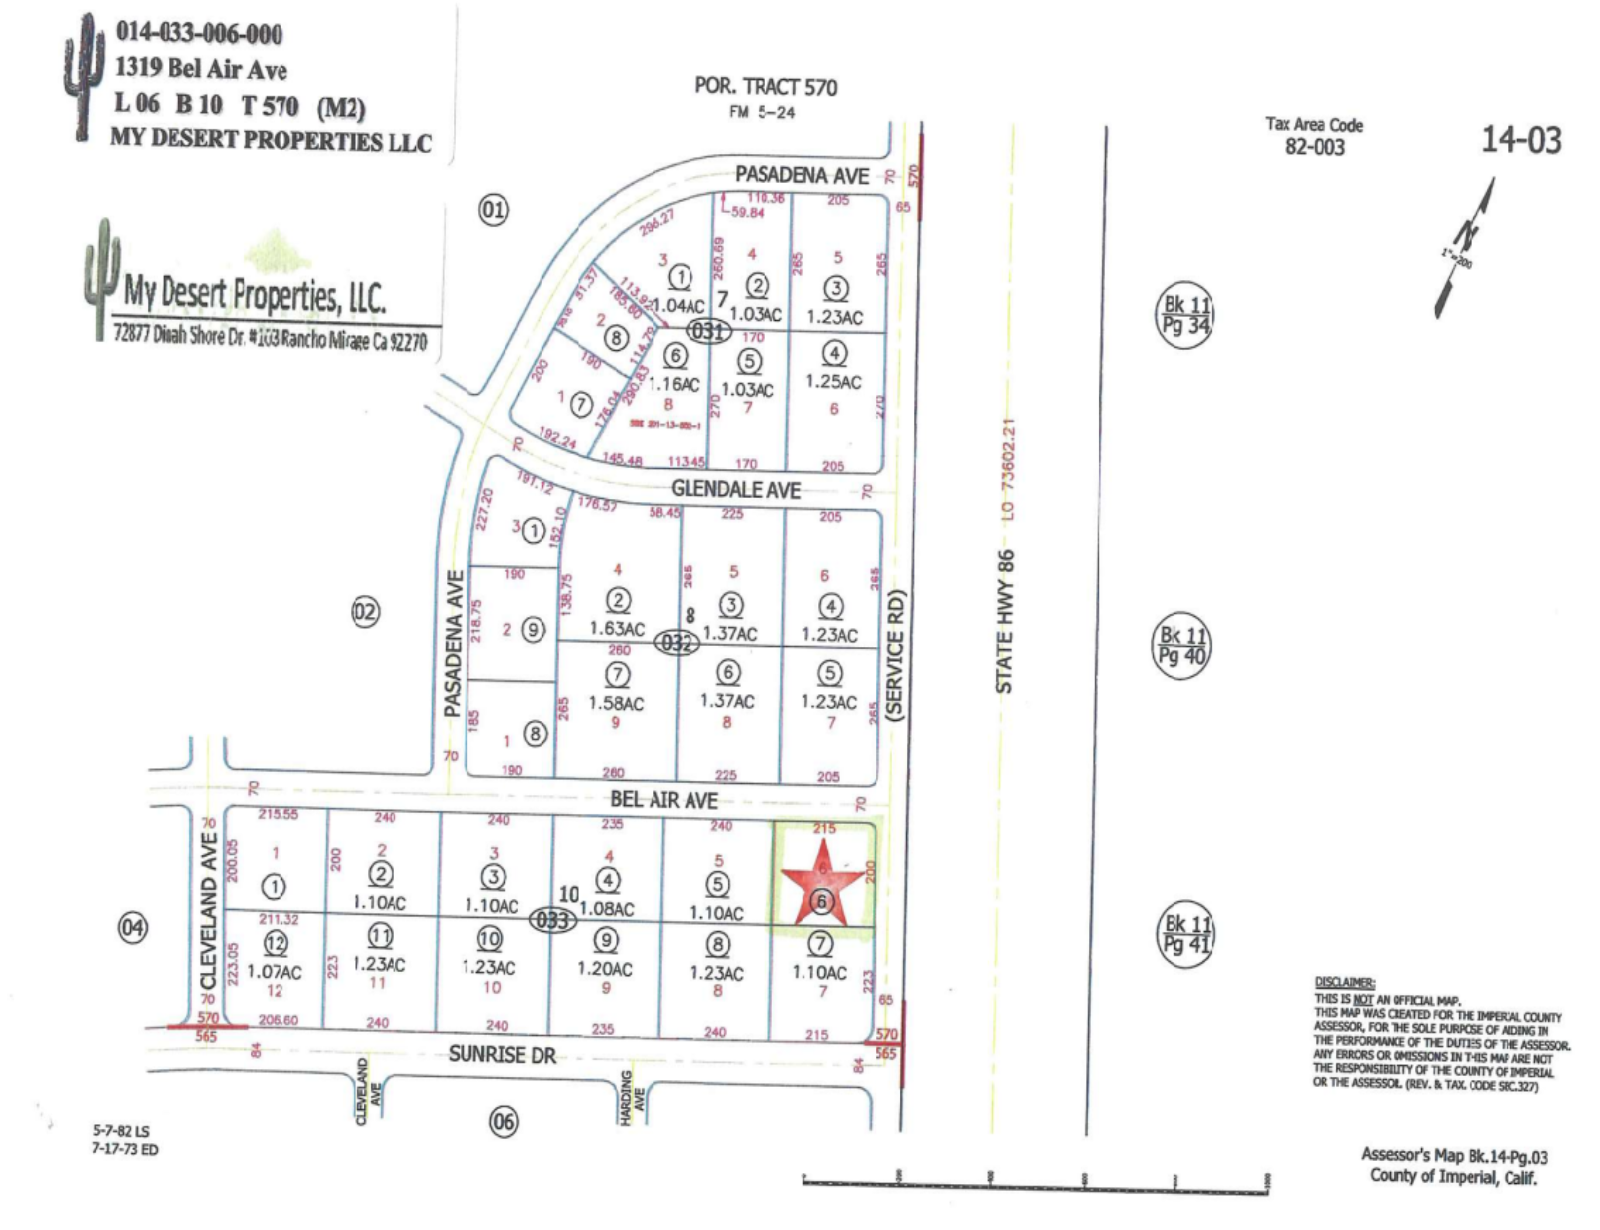 *NEW* LITHIUM VALLEY LOT!! LOW MONTHLY PAYMENTS!! 1319 Bel Air Ave., Salton City, CA 92275 APN: 014-033-006-000 - Get Land Today